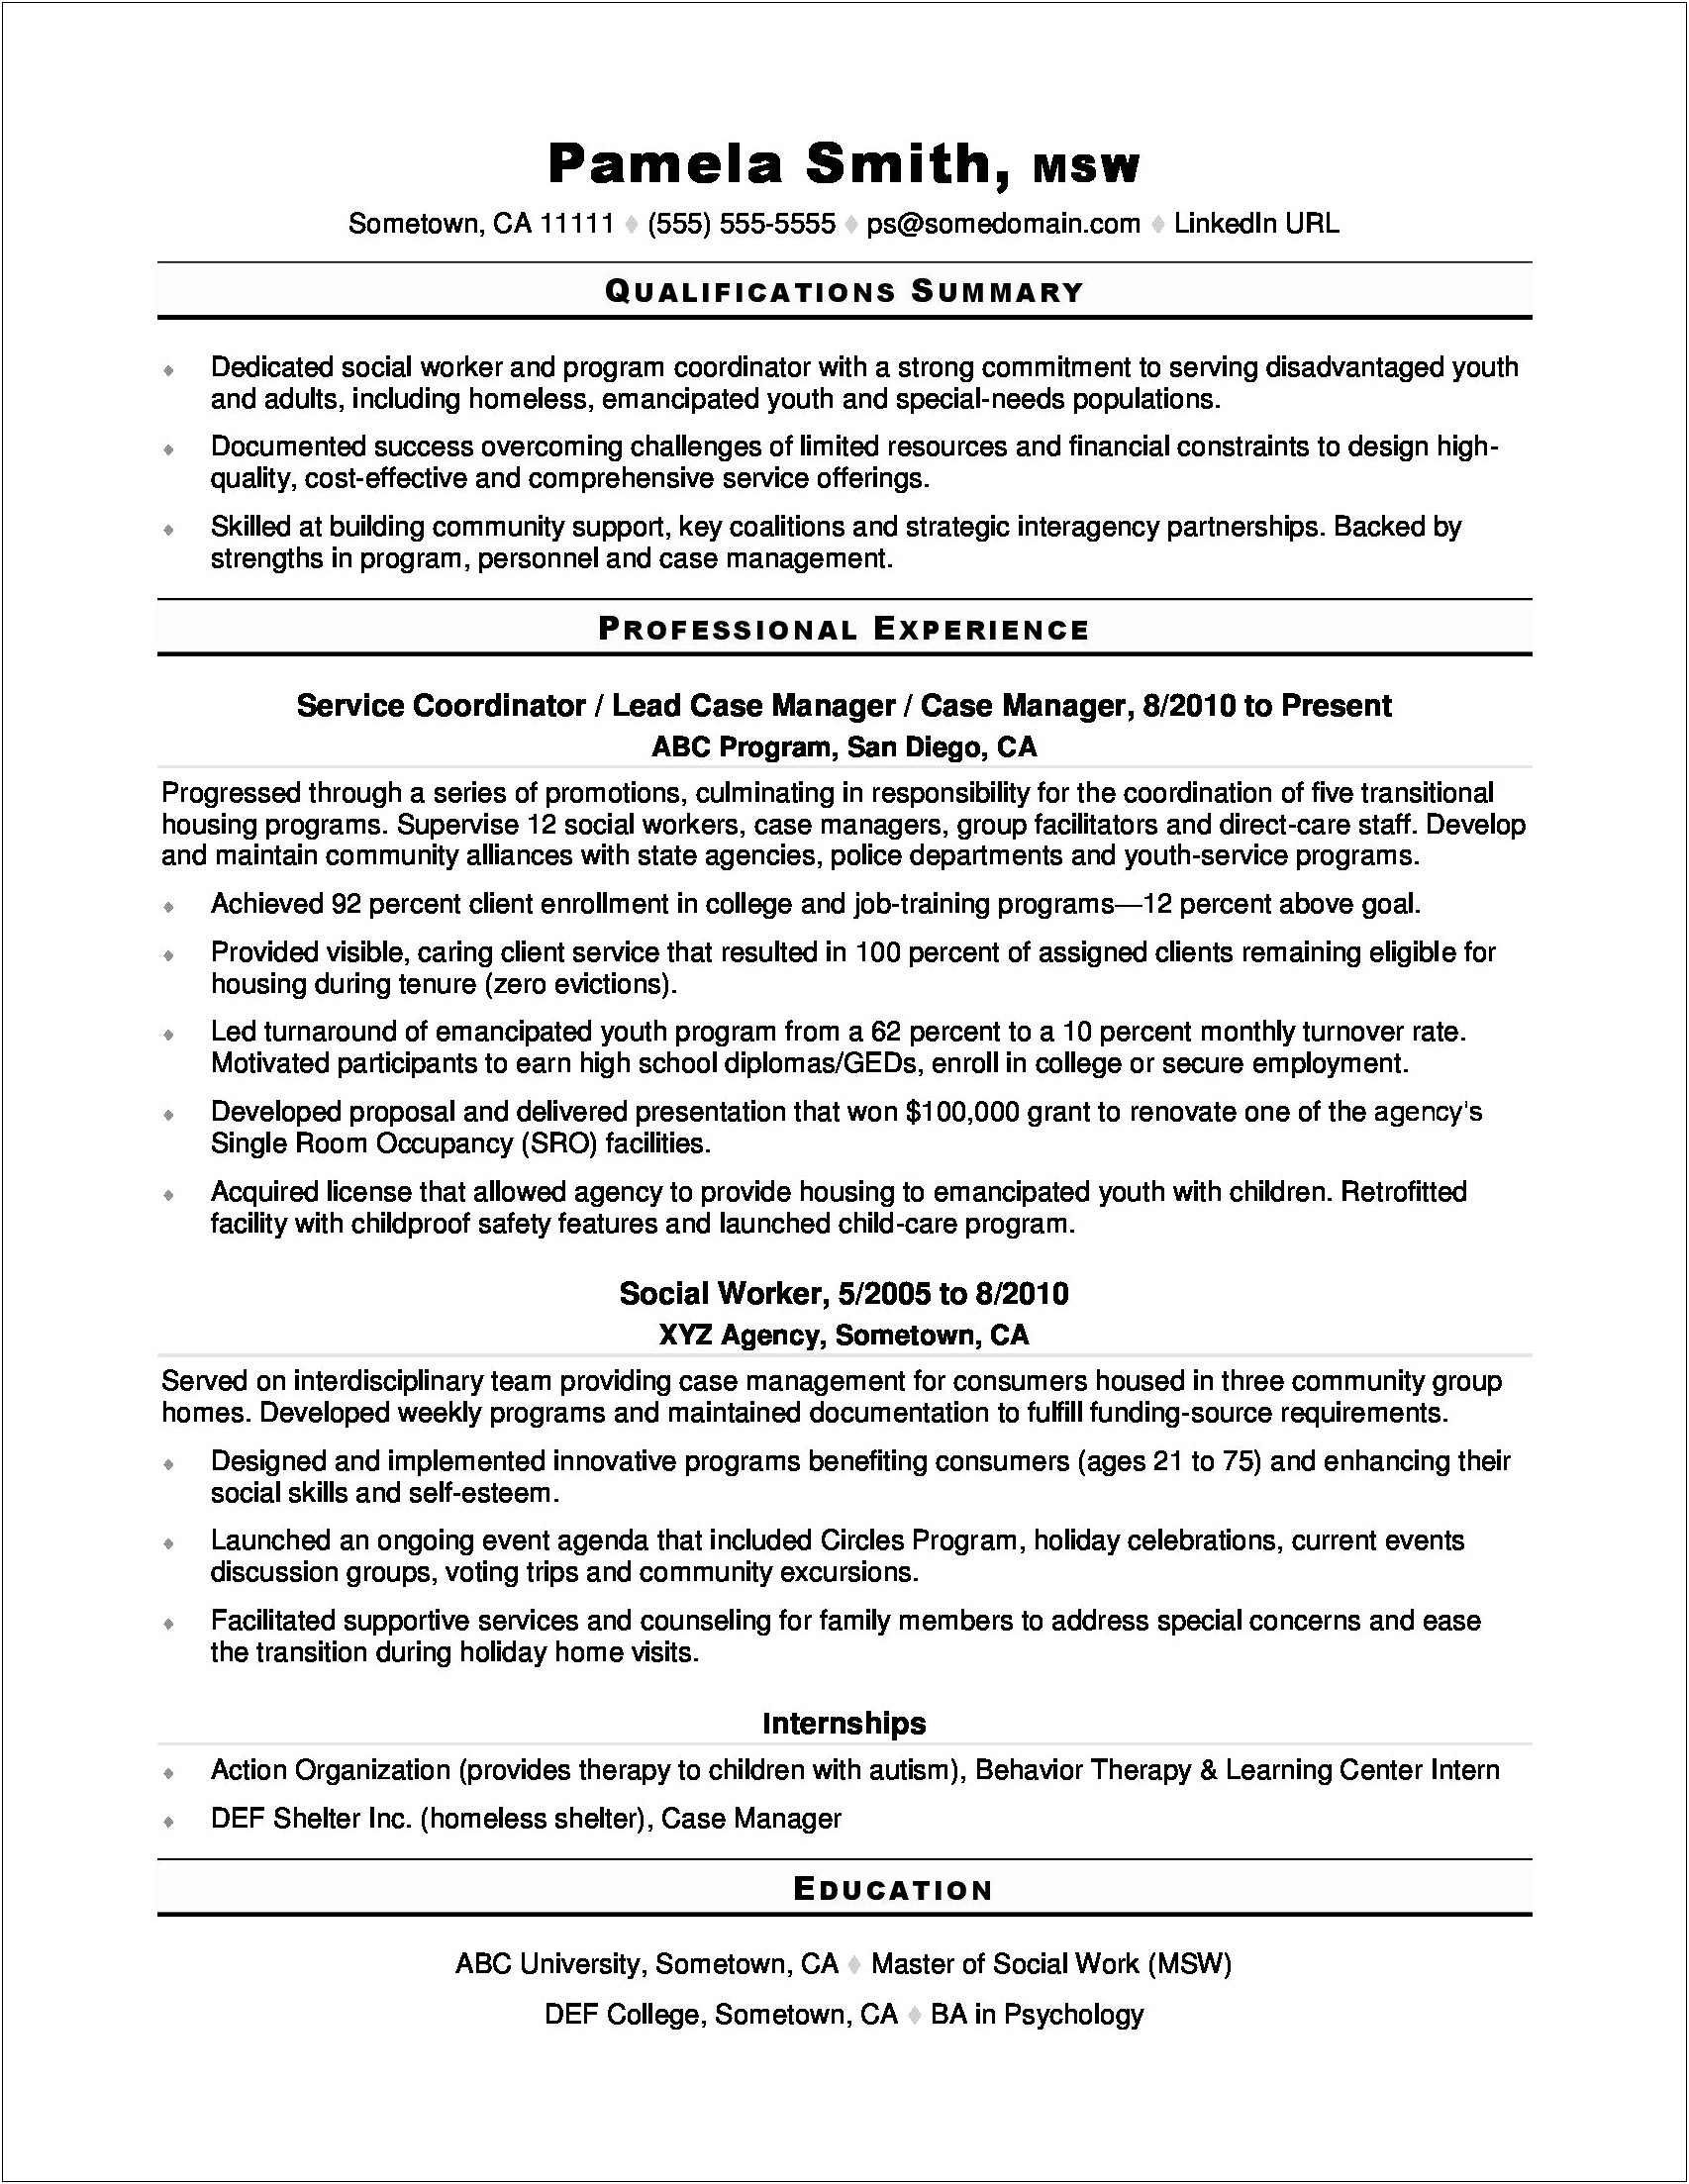 Examples Of Objectives For A Youth Development Resume